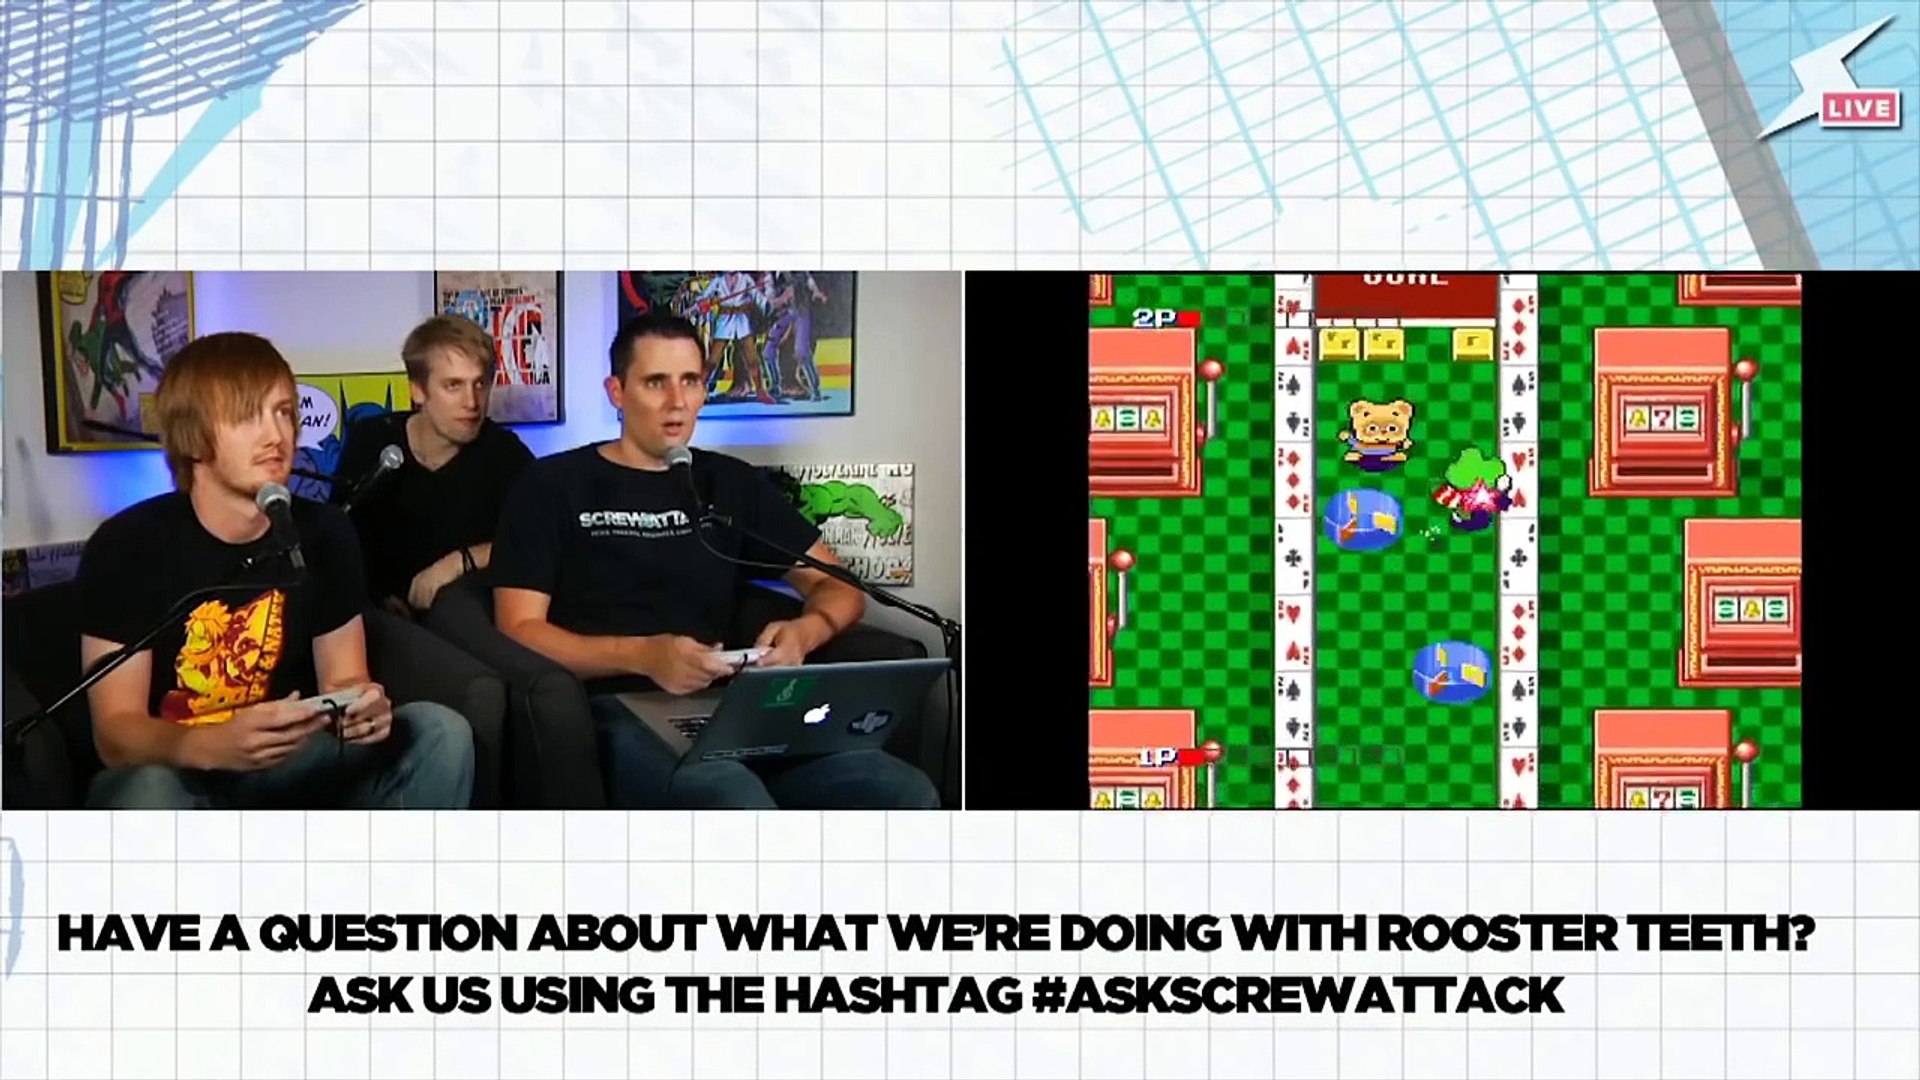 How ScrewAttack & Rooster Teeth will be working together | ScrewAttack/Rooster Teeth Q&A